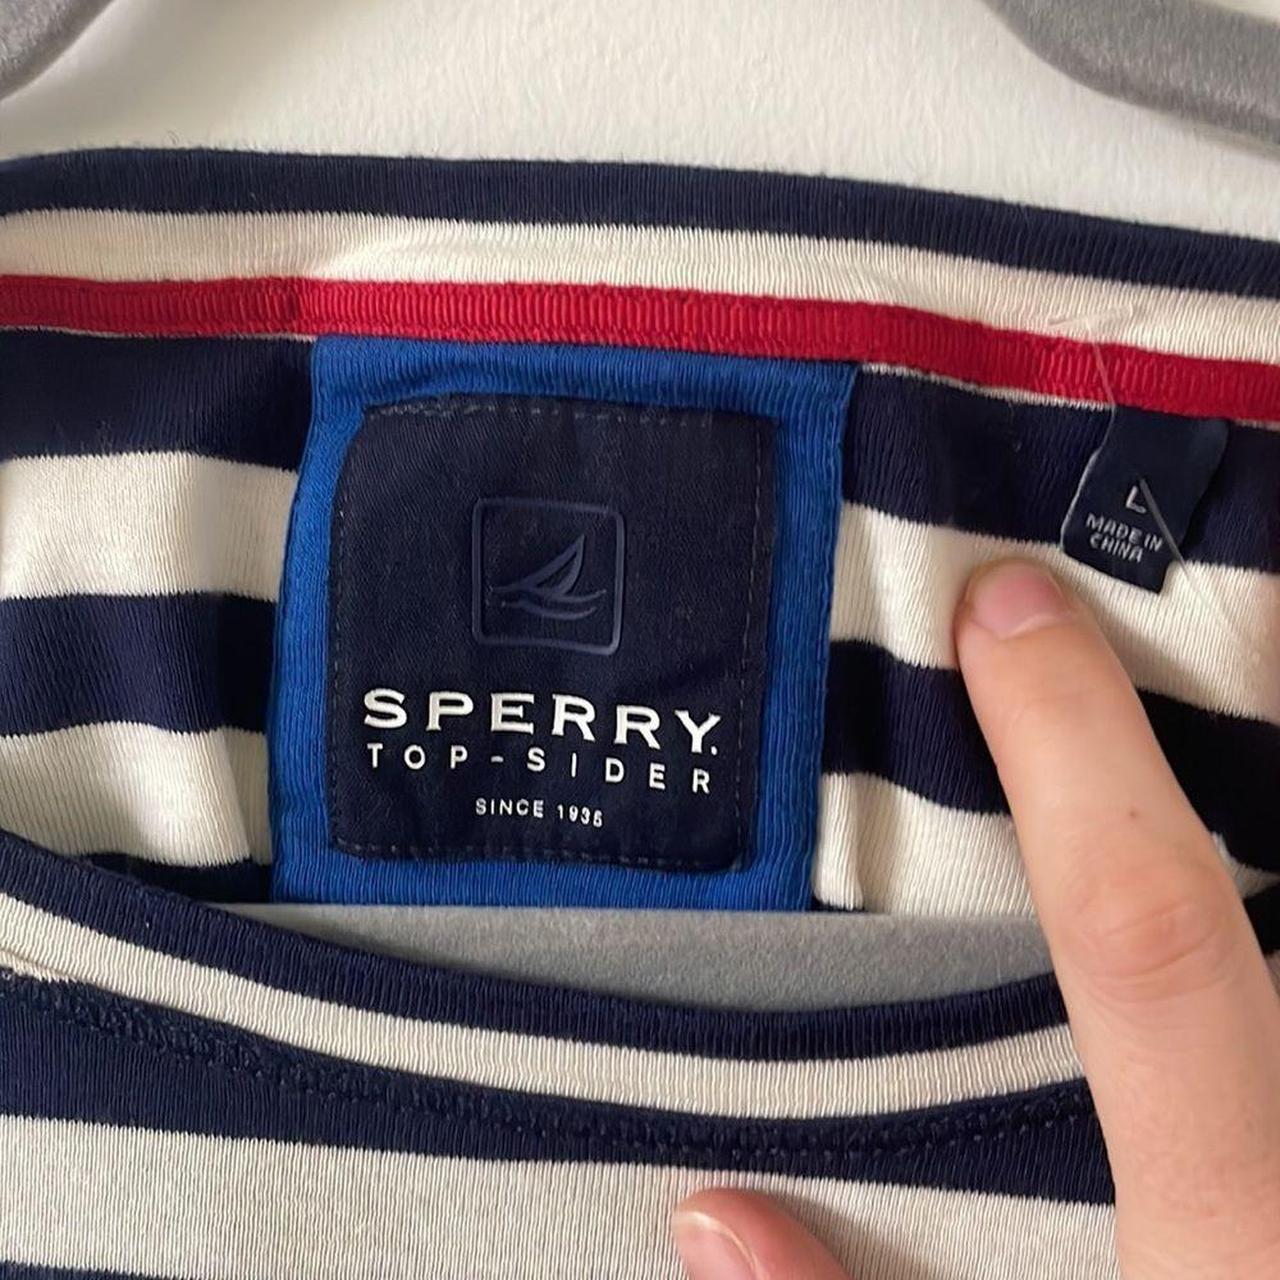 Sperry Women's White and Blue Shirt (3)